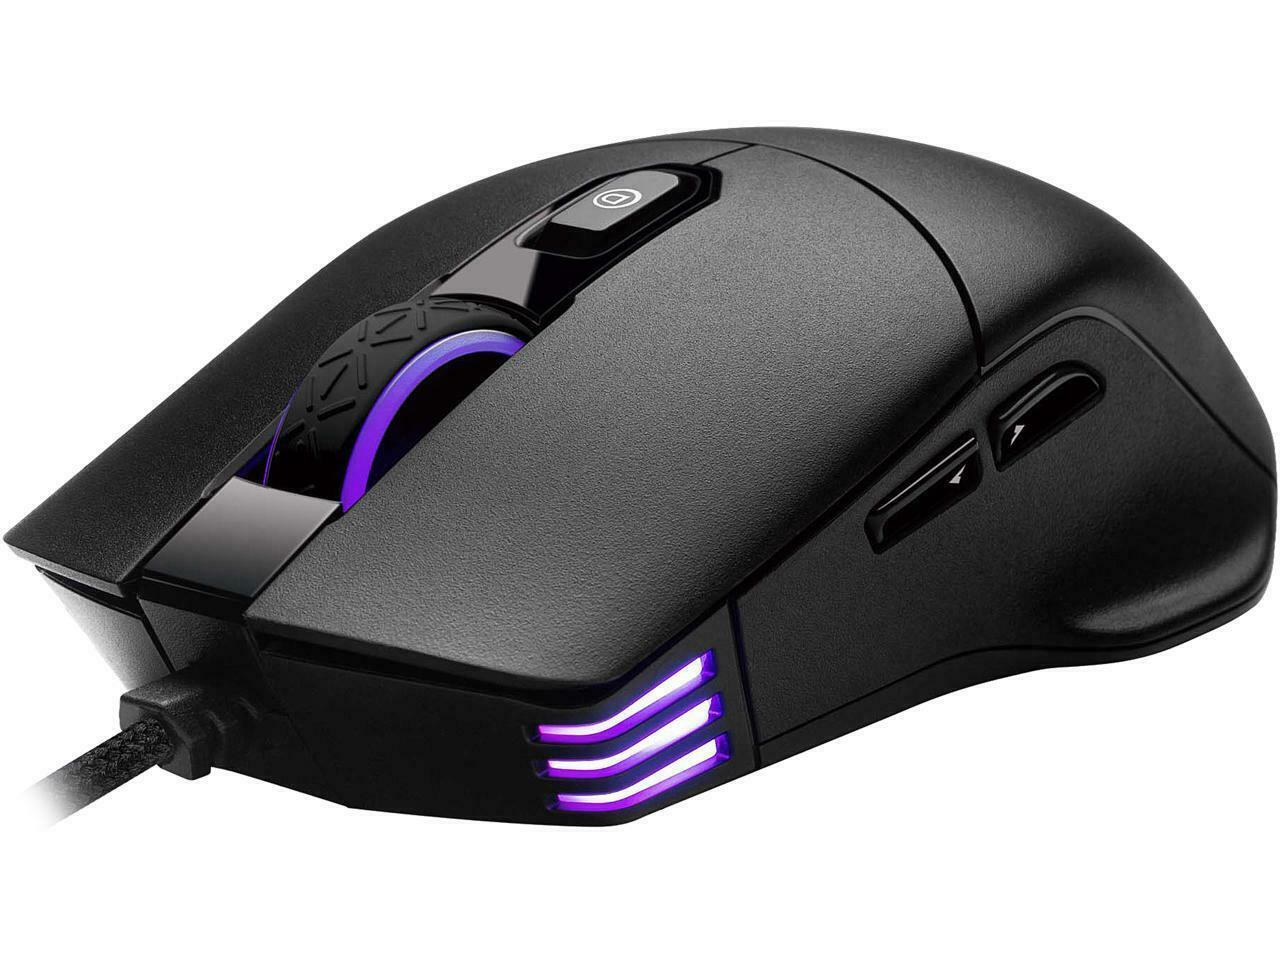 EVGA X12 Gaming Mouse for $14.99 Shipped